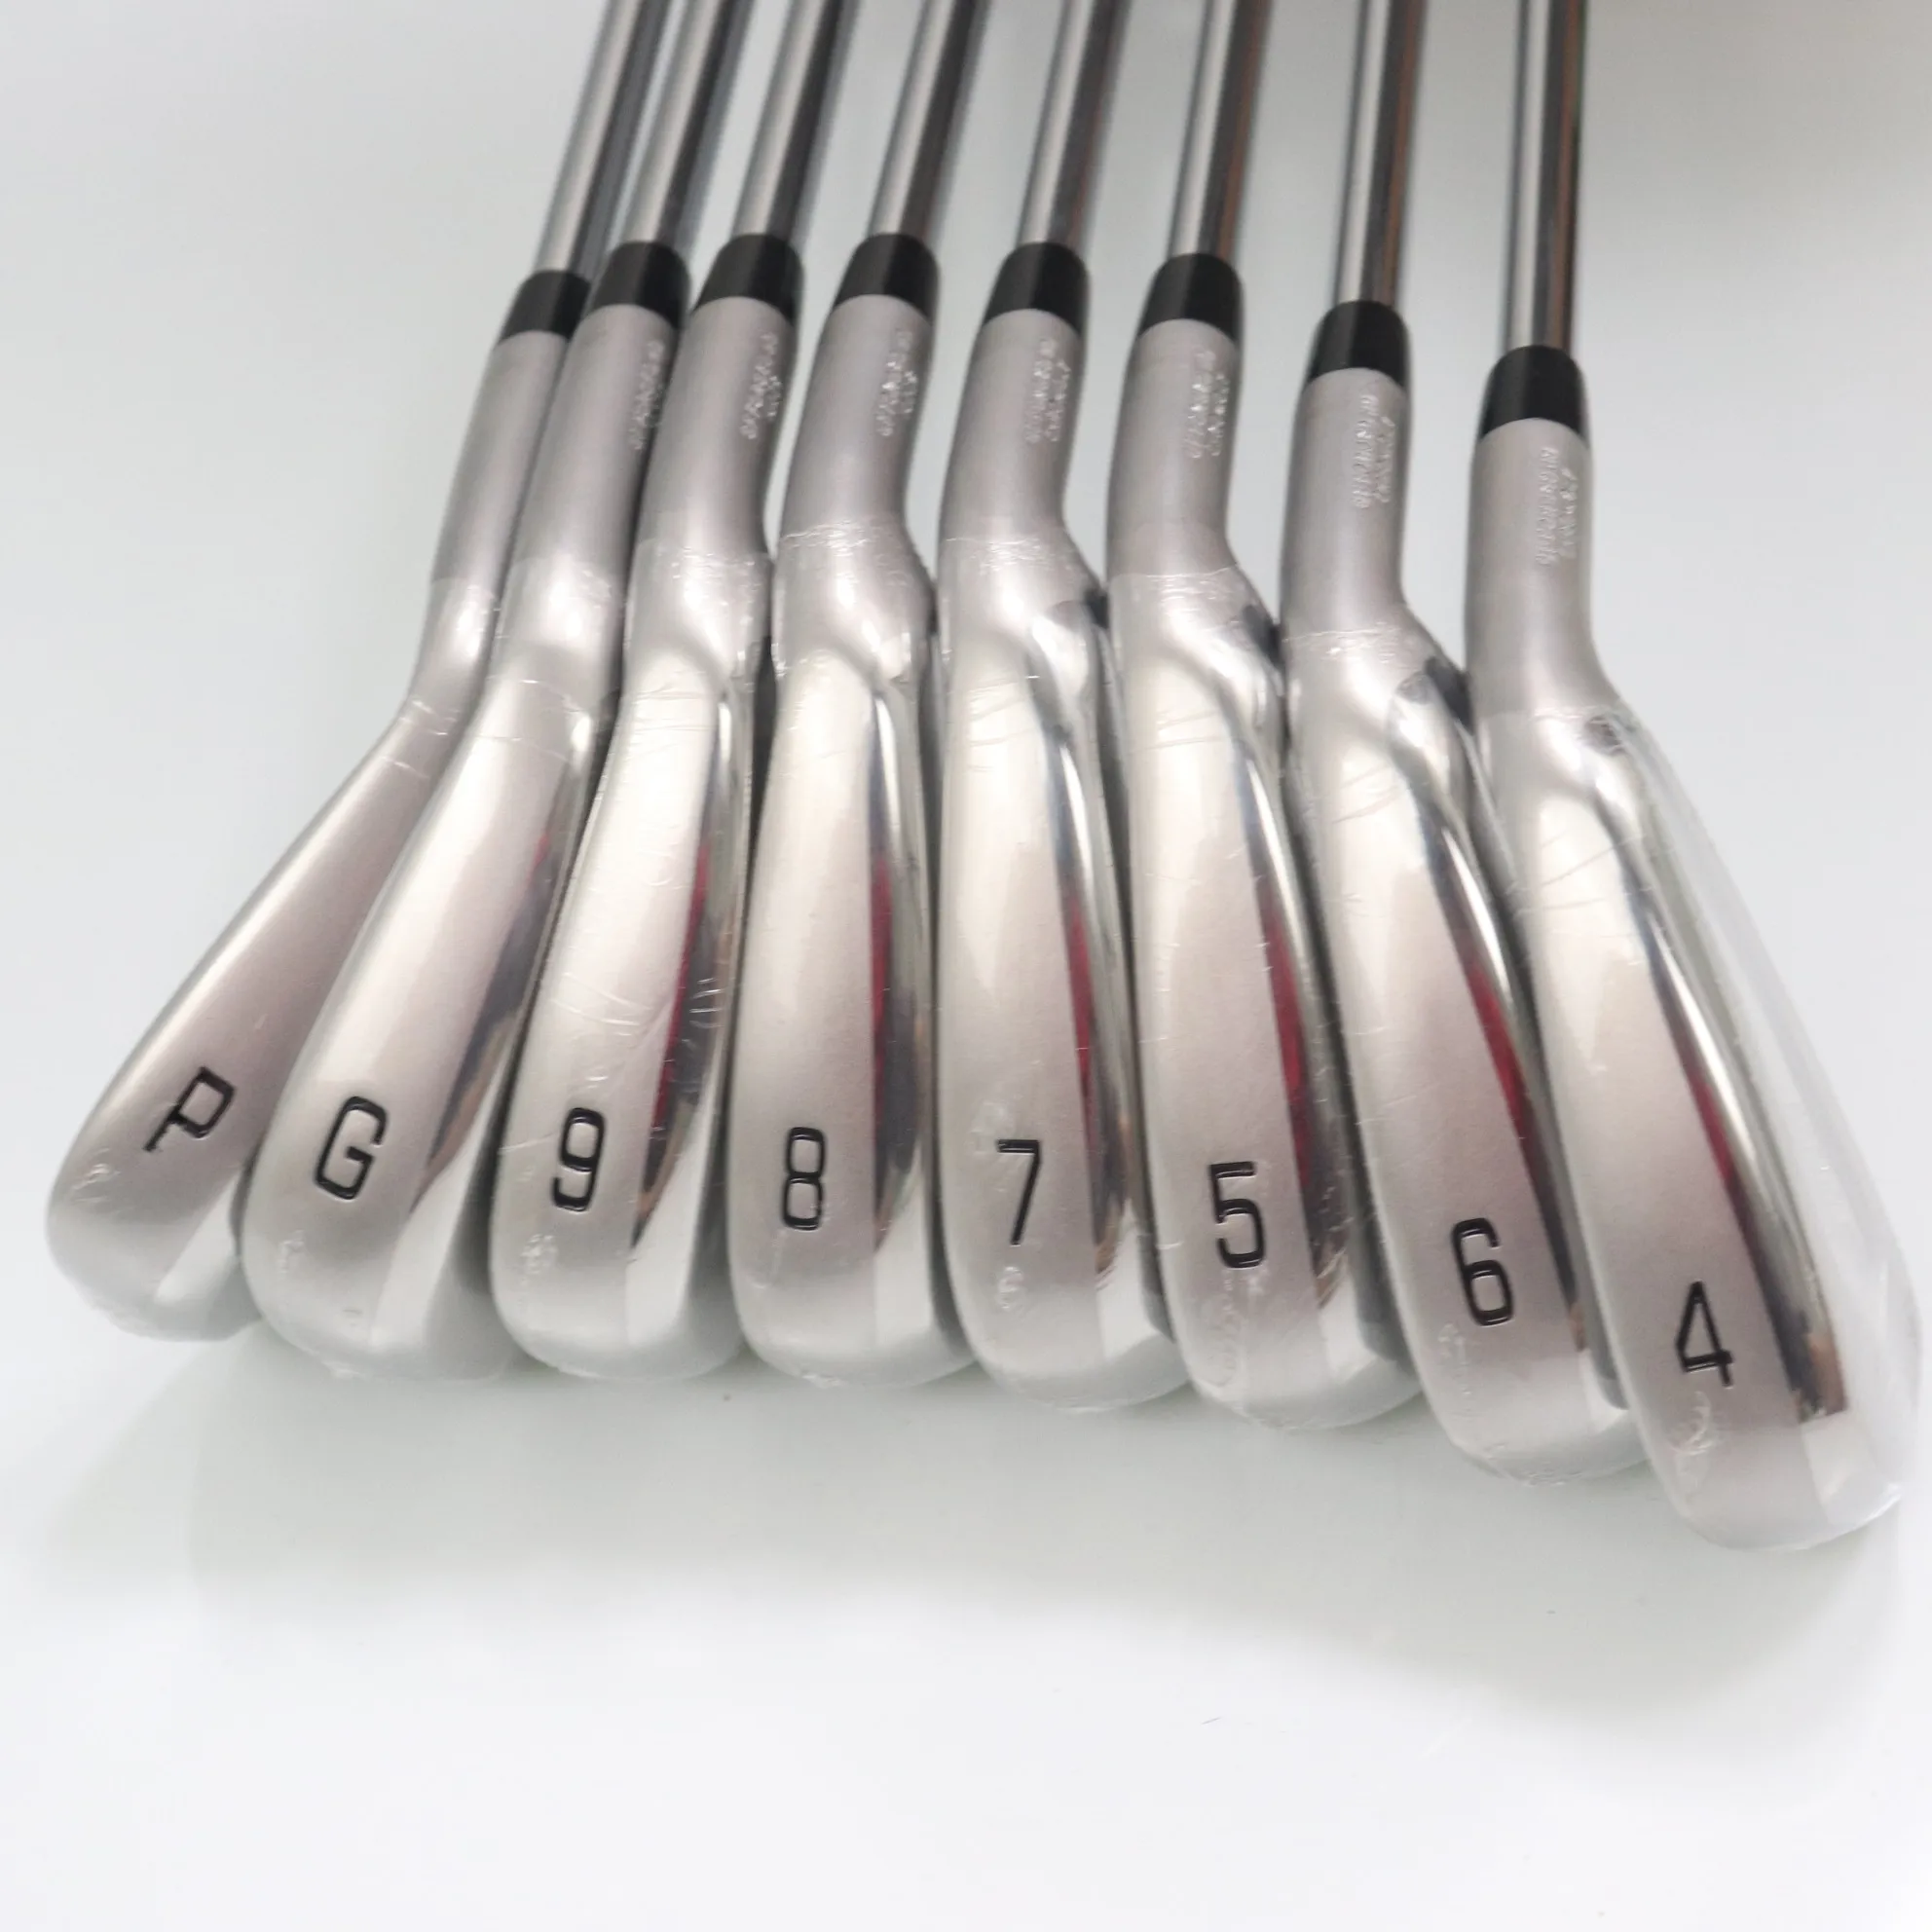 

Mens 921 Golf Iron Set 921 Golf Clubs Silver Heads 8pcs Soft Iron With Graphite/Steel Shaft With Headcovers